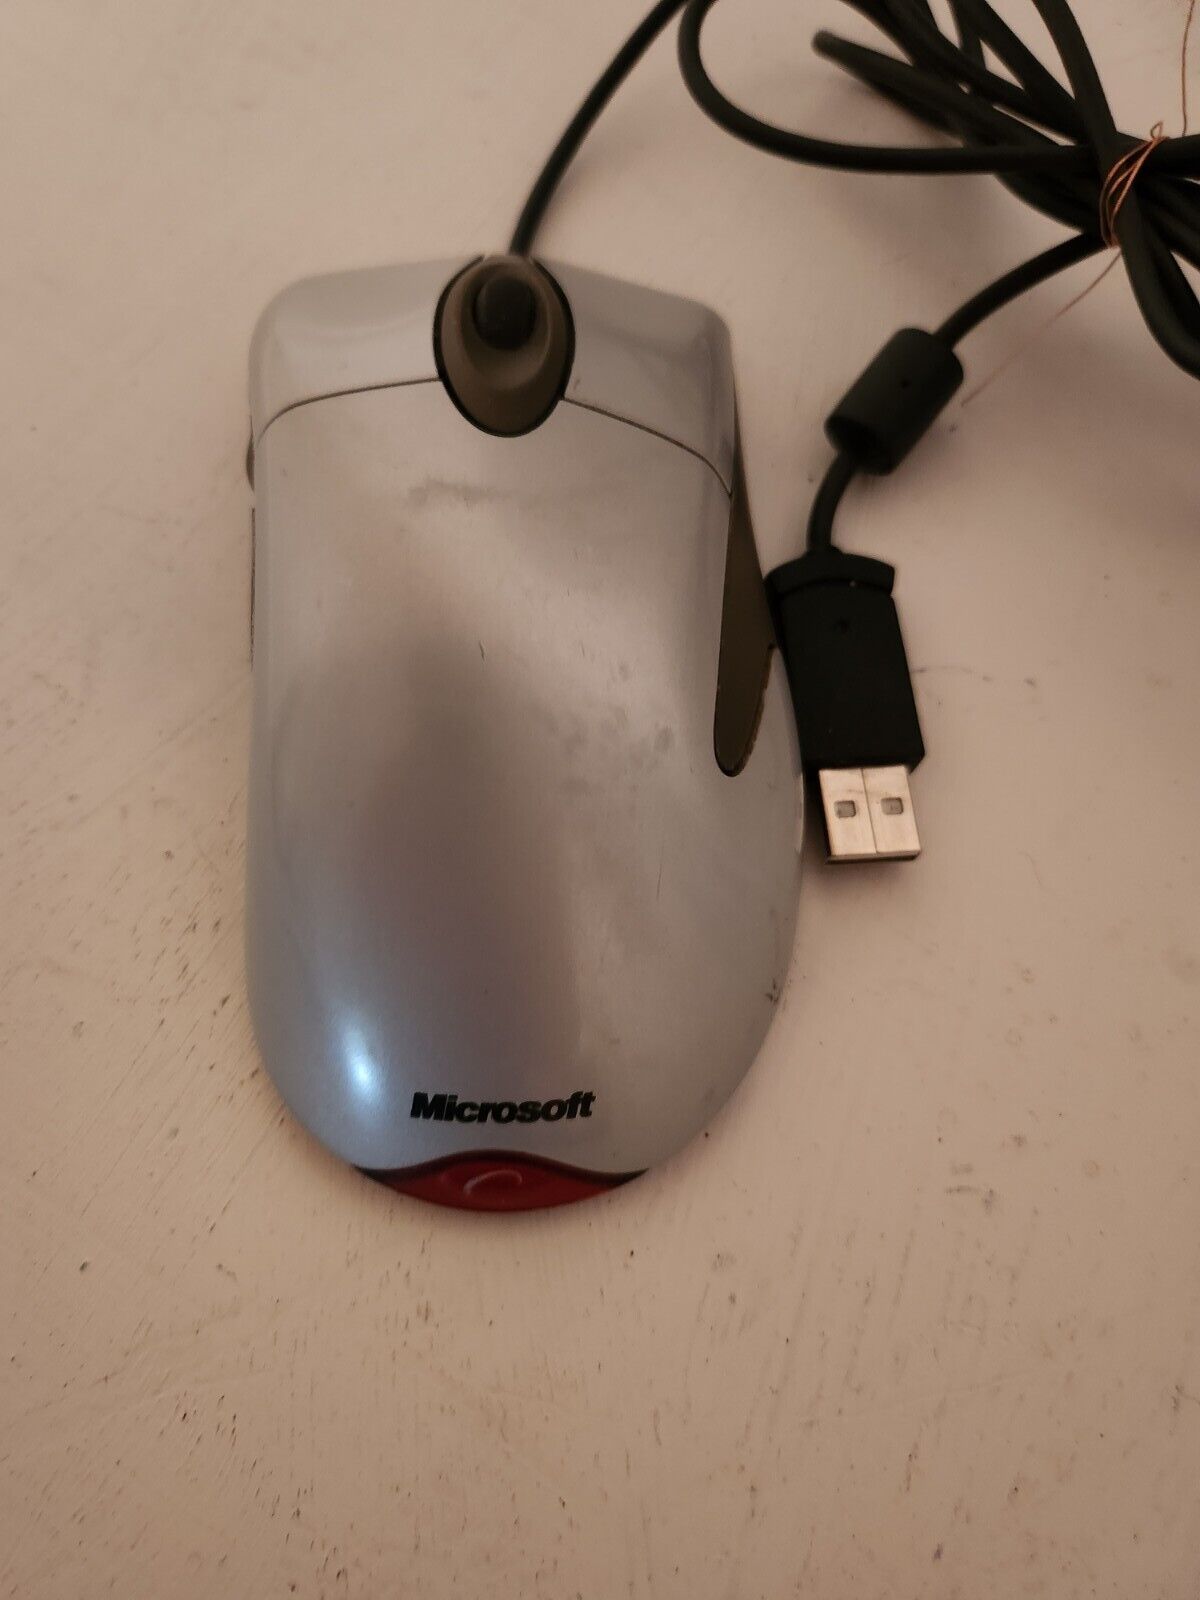 Microsoft IntelliMouse Explorer 3.0 Wired Optical Mouse P/N X08-26970 Ergo